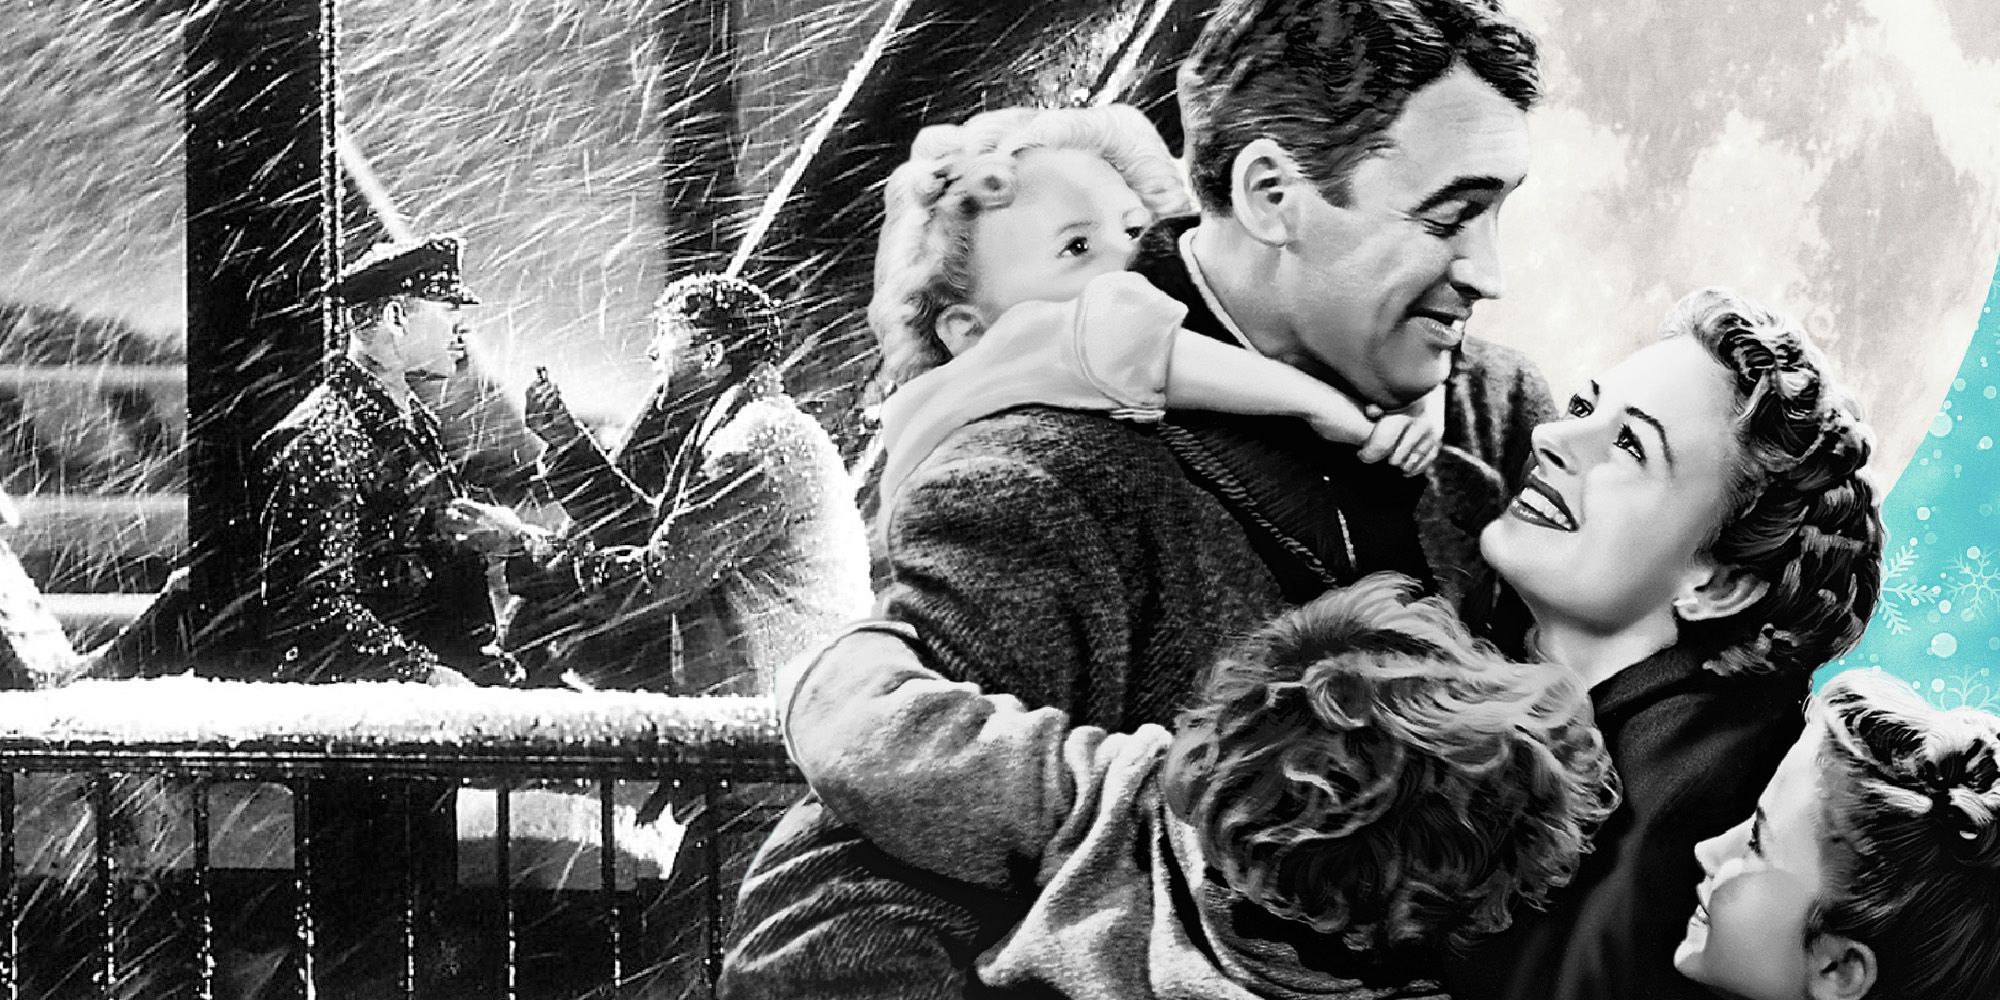 Why The Snow In Its A Wonderful Life Looks So Fake